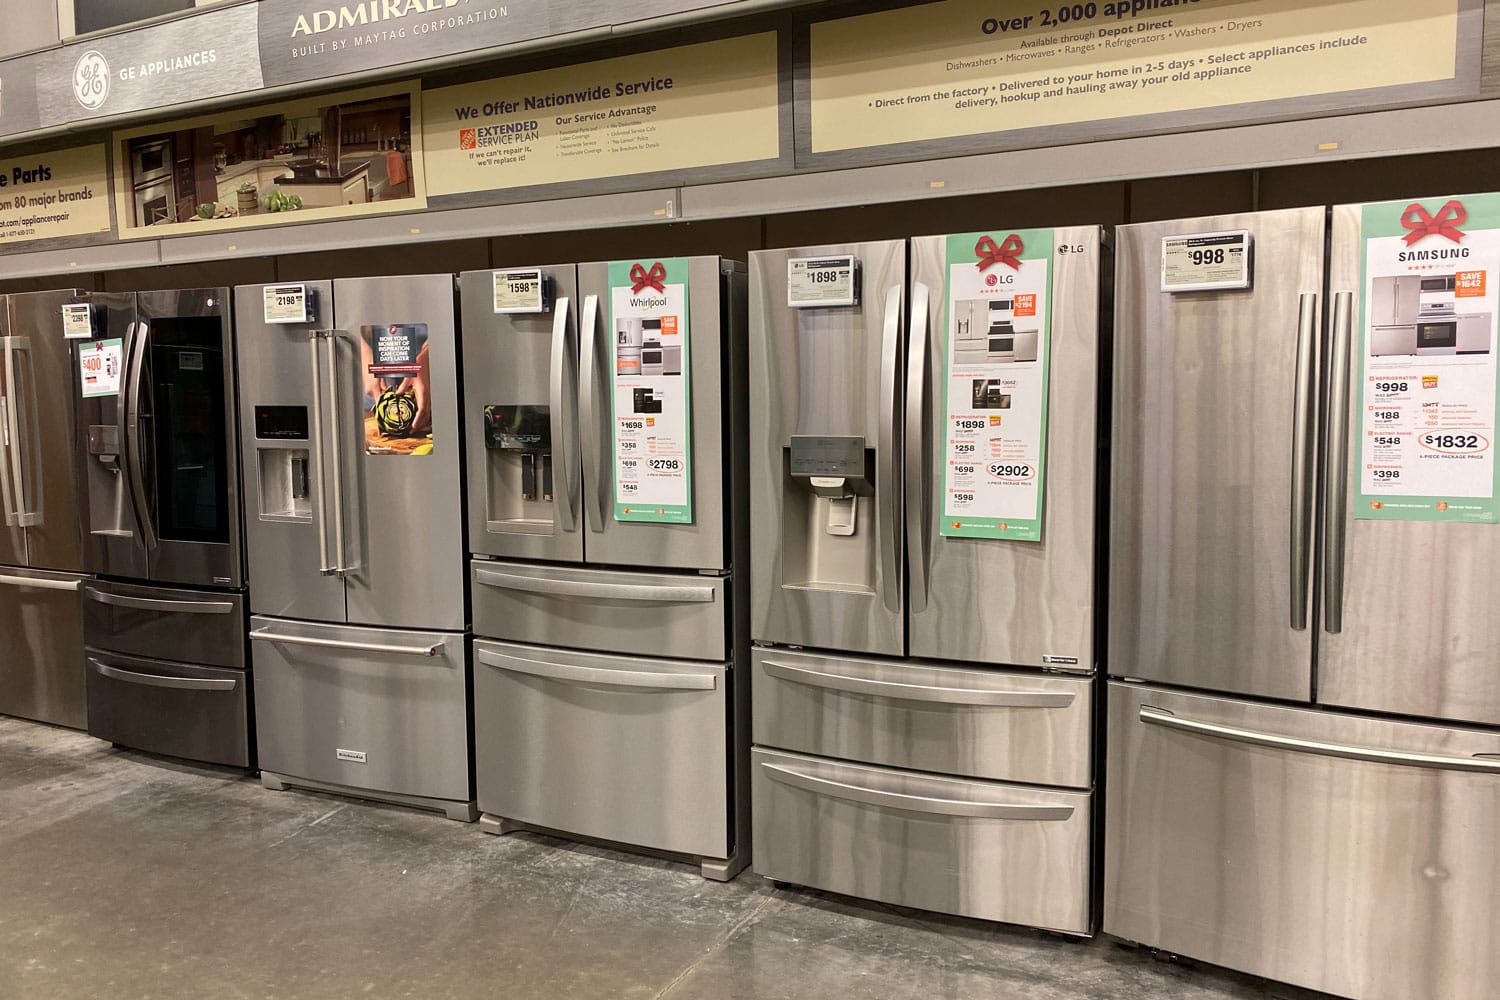 A Whirlpool refrigerator displayed at a store